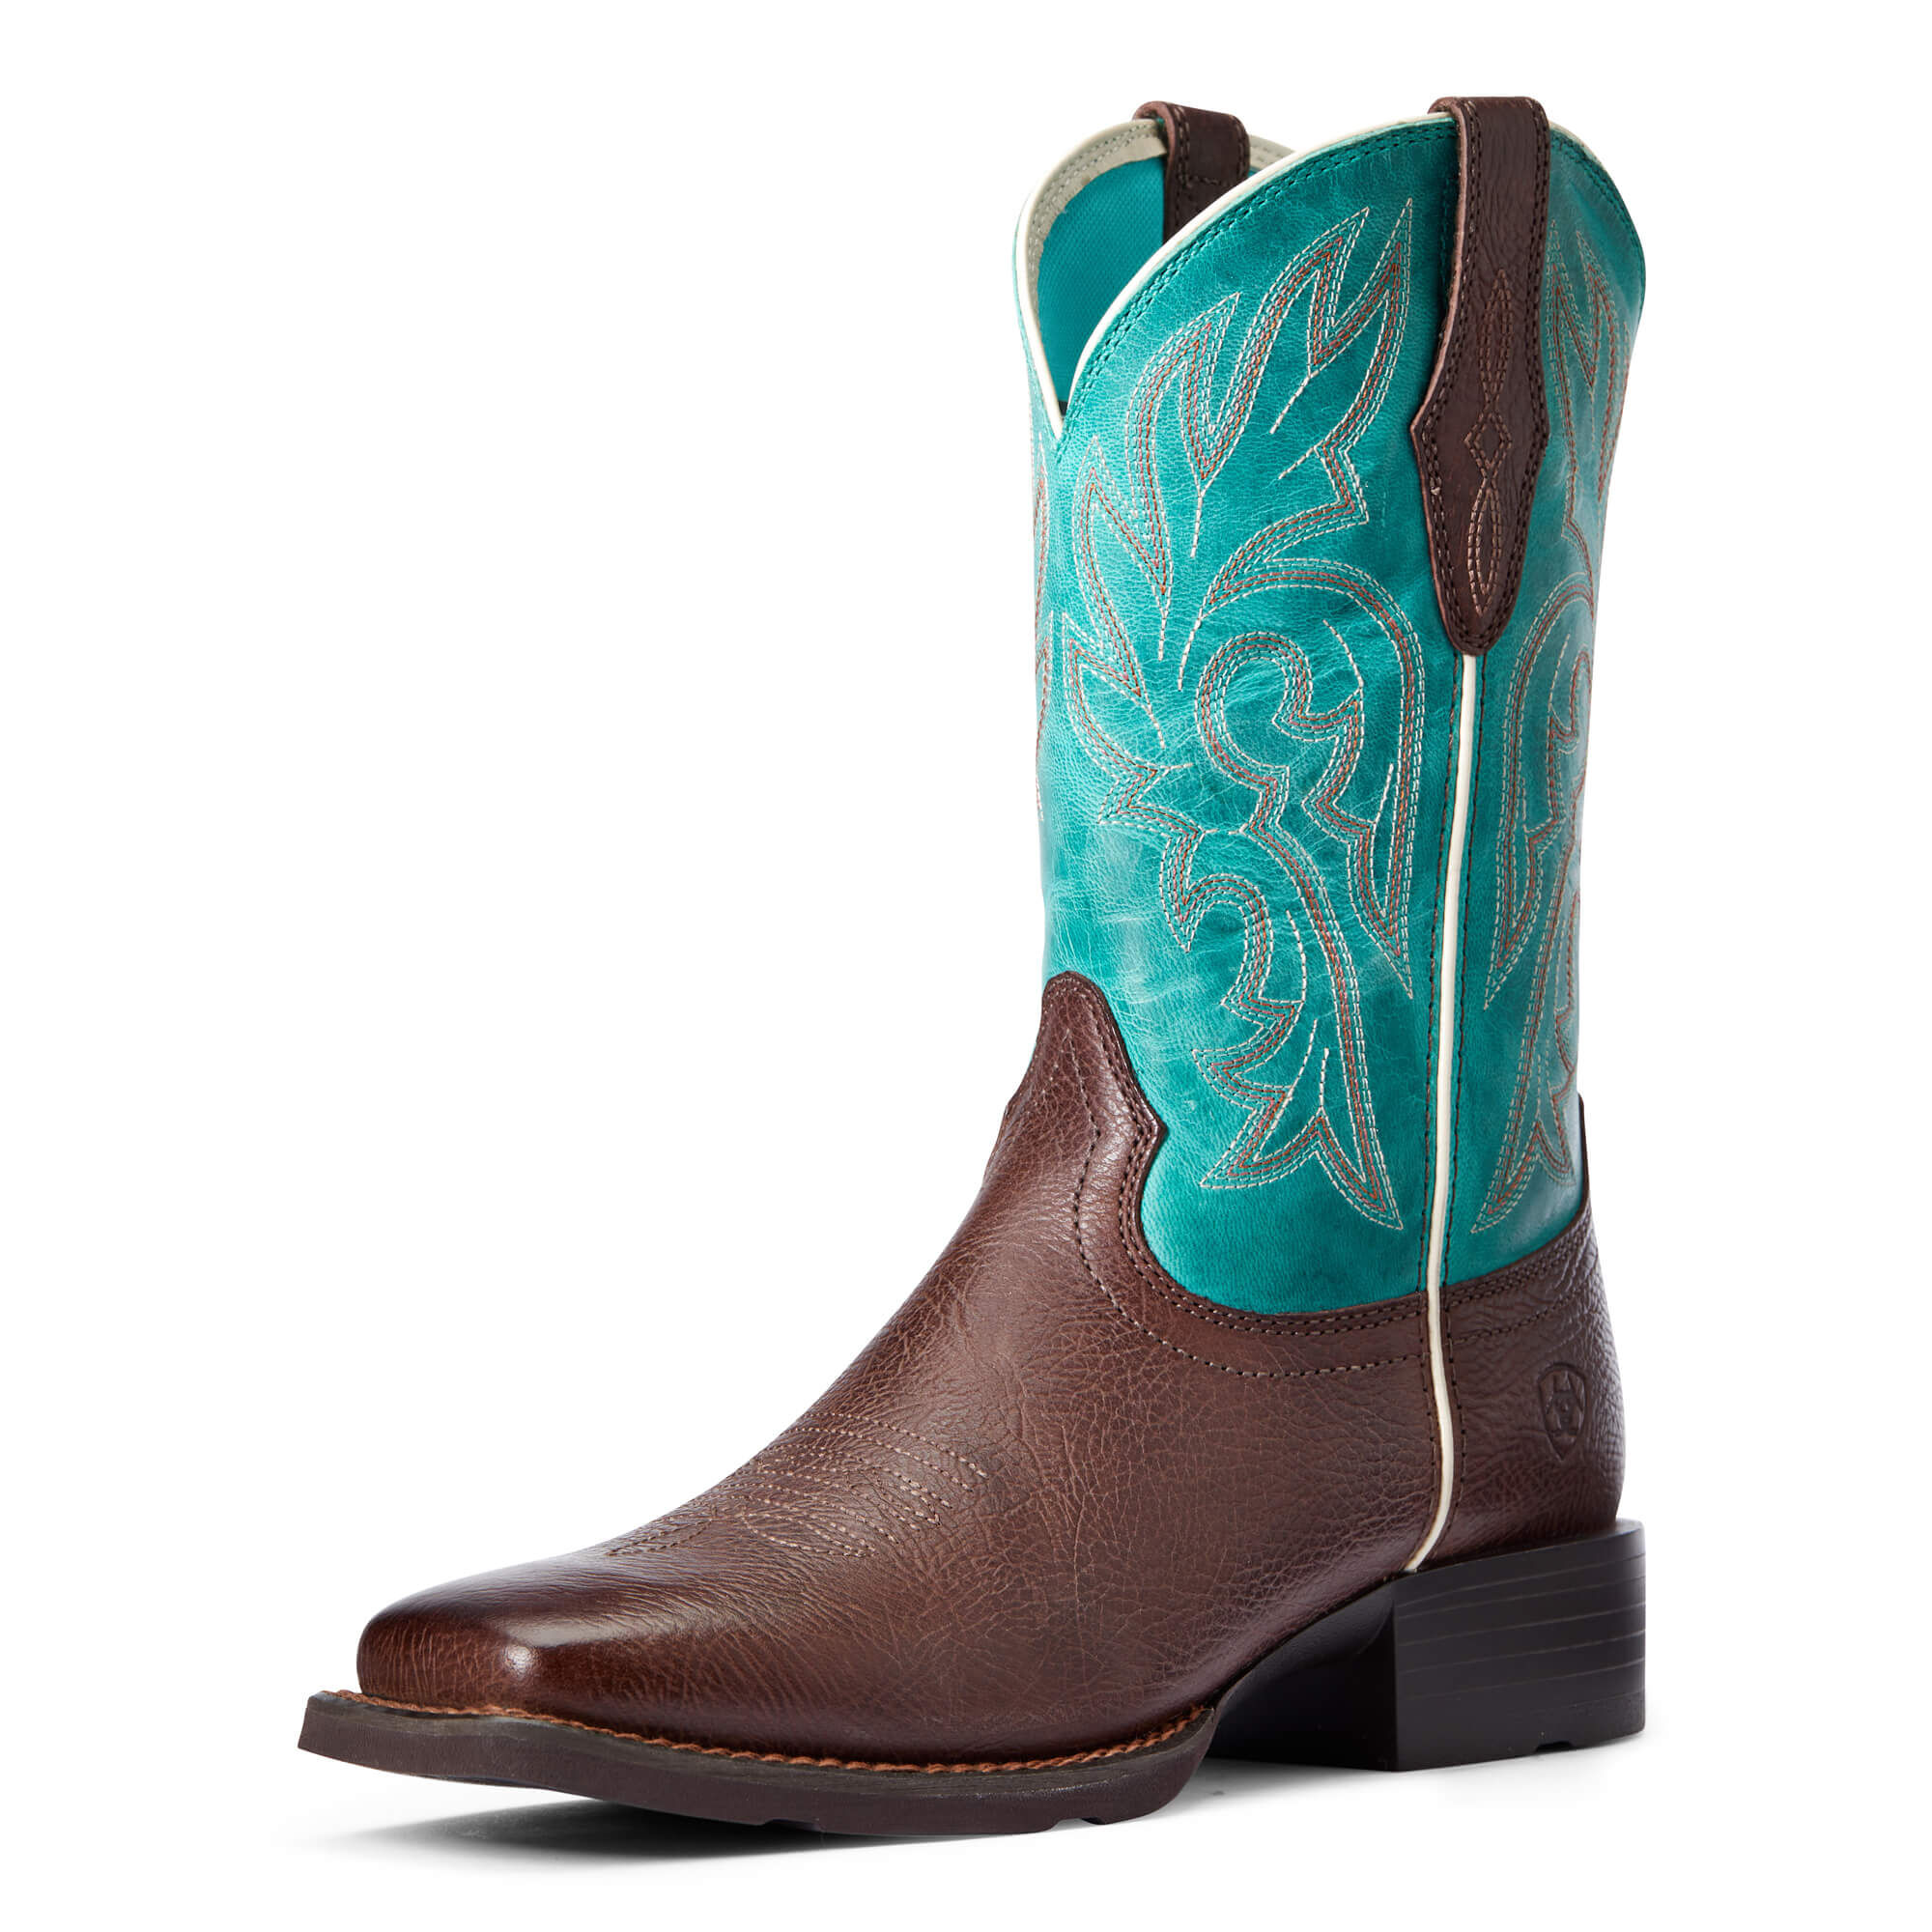 Women's Cattle Drive Western Boots in Dark Cottage Leather  by Ariat